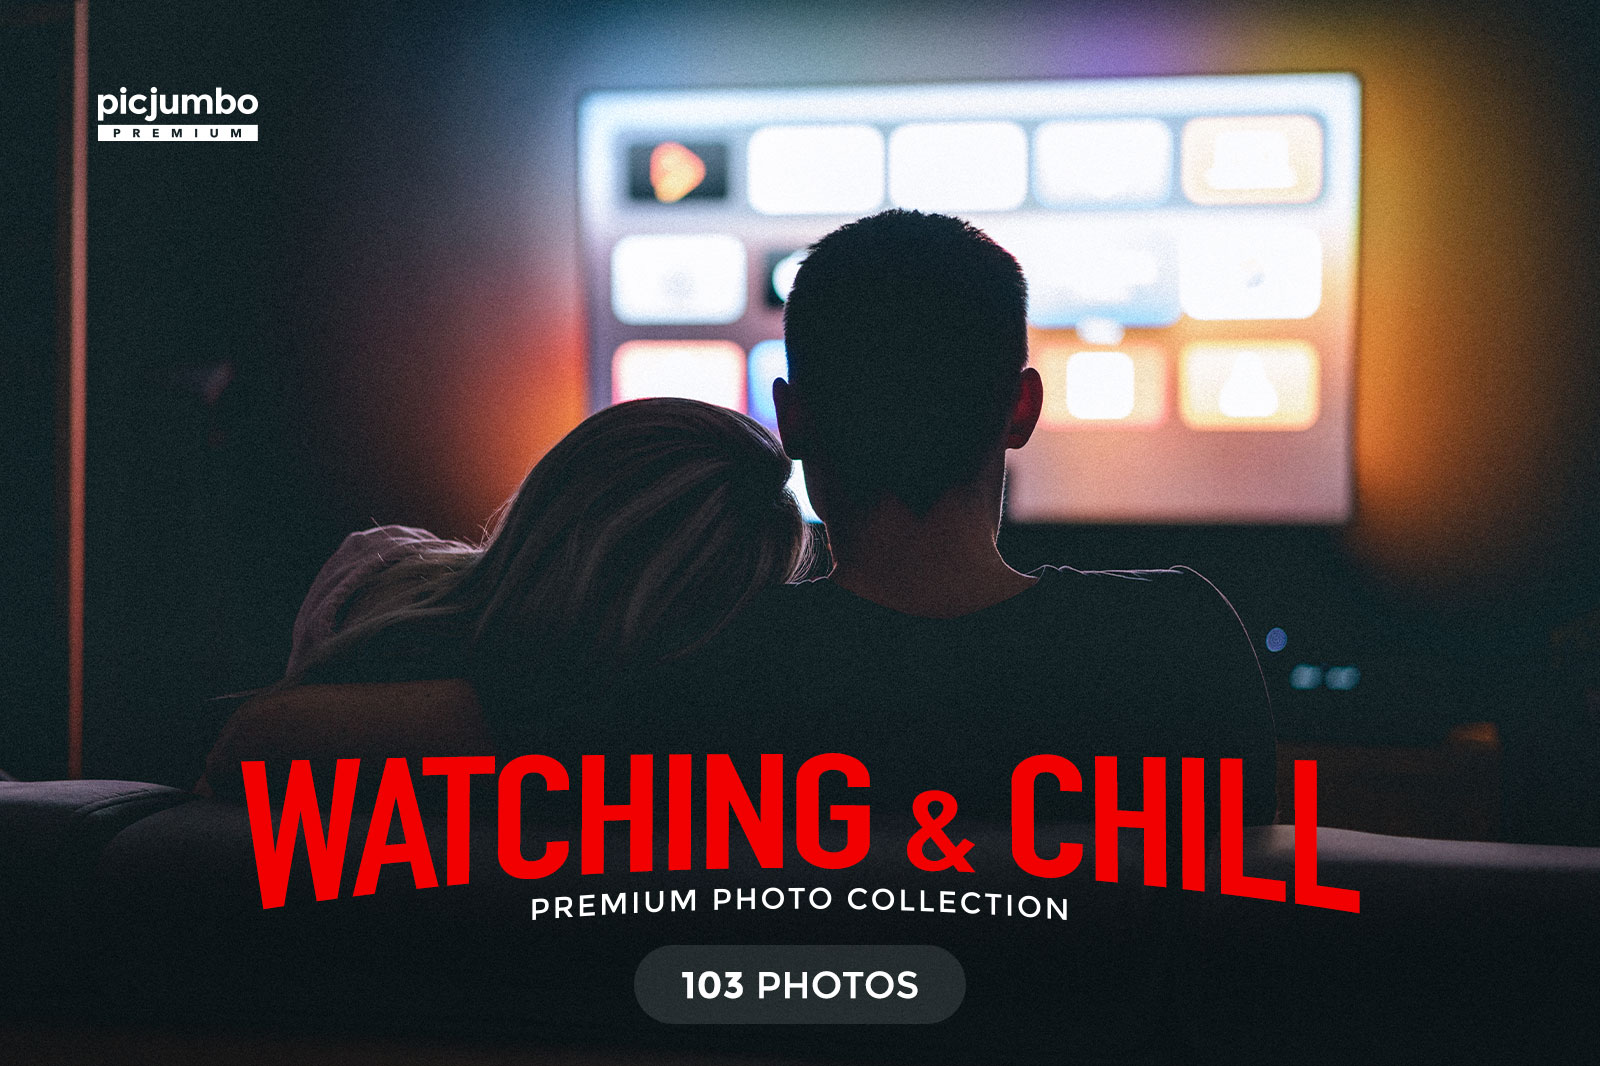 Watching & Chill Stock Photo Collection